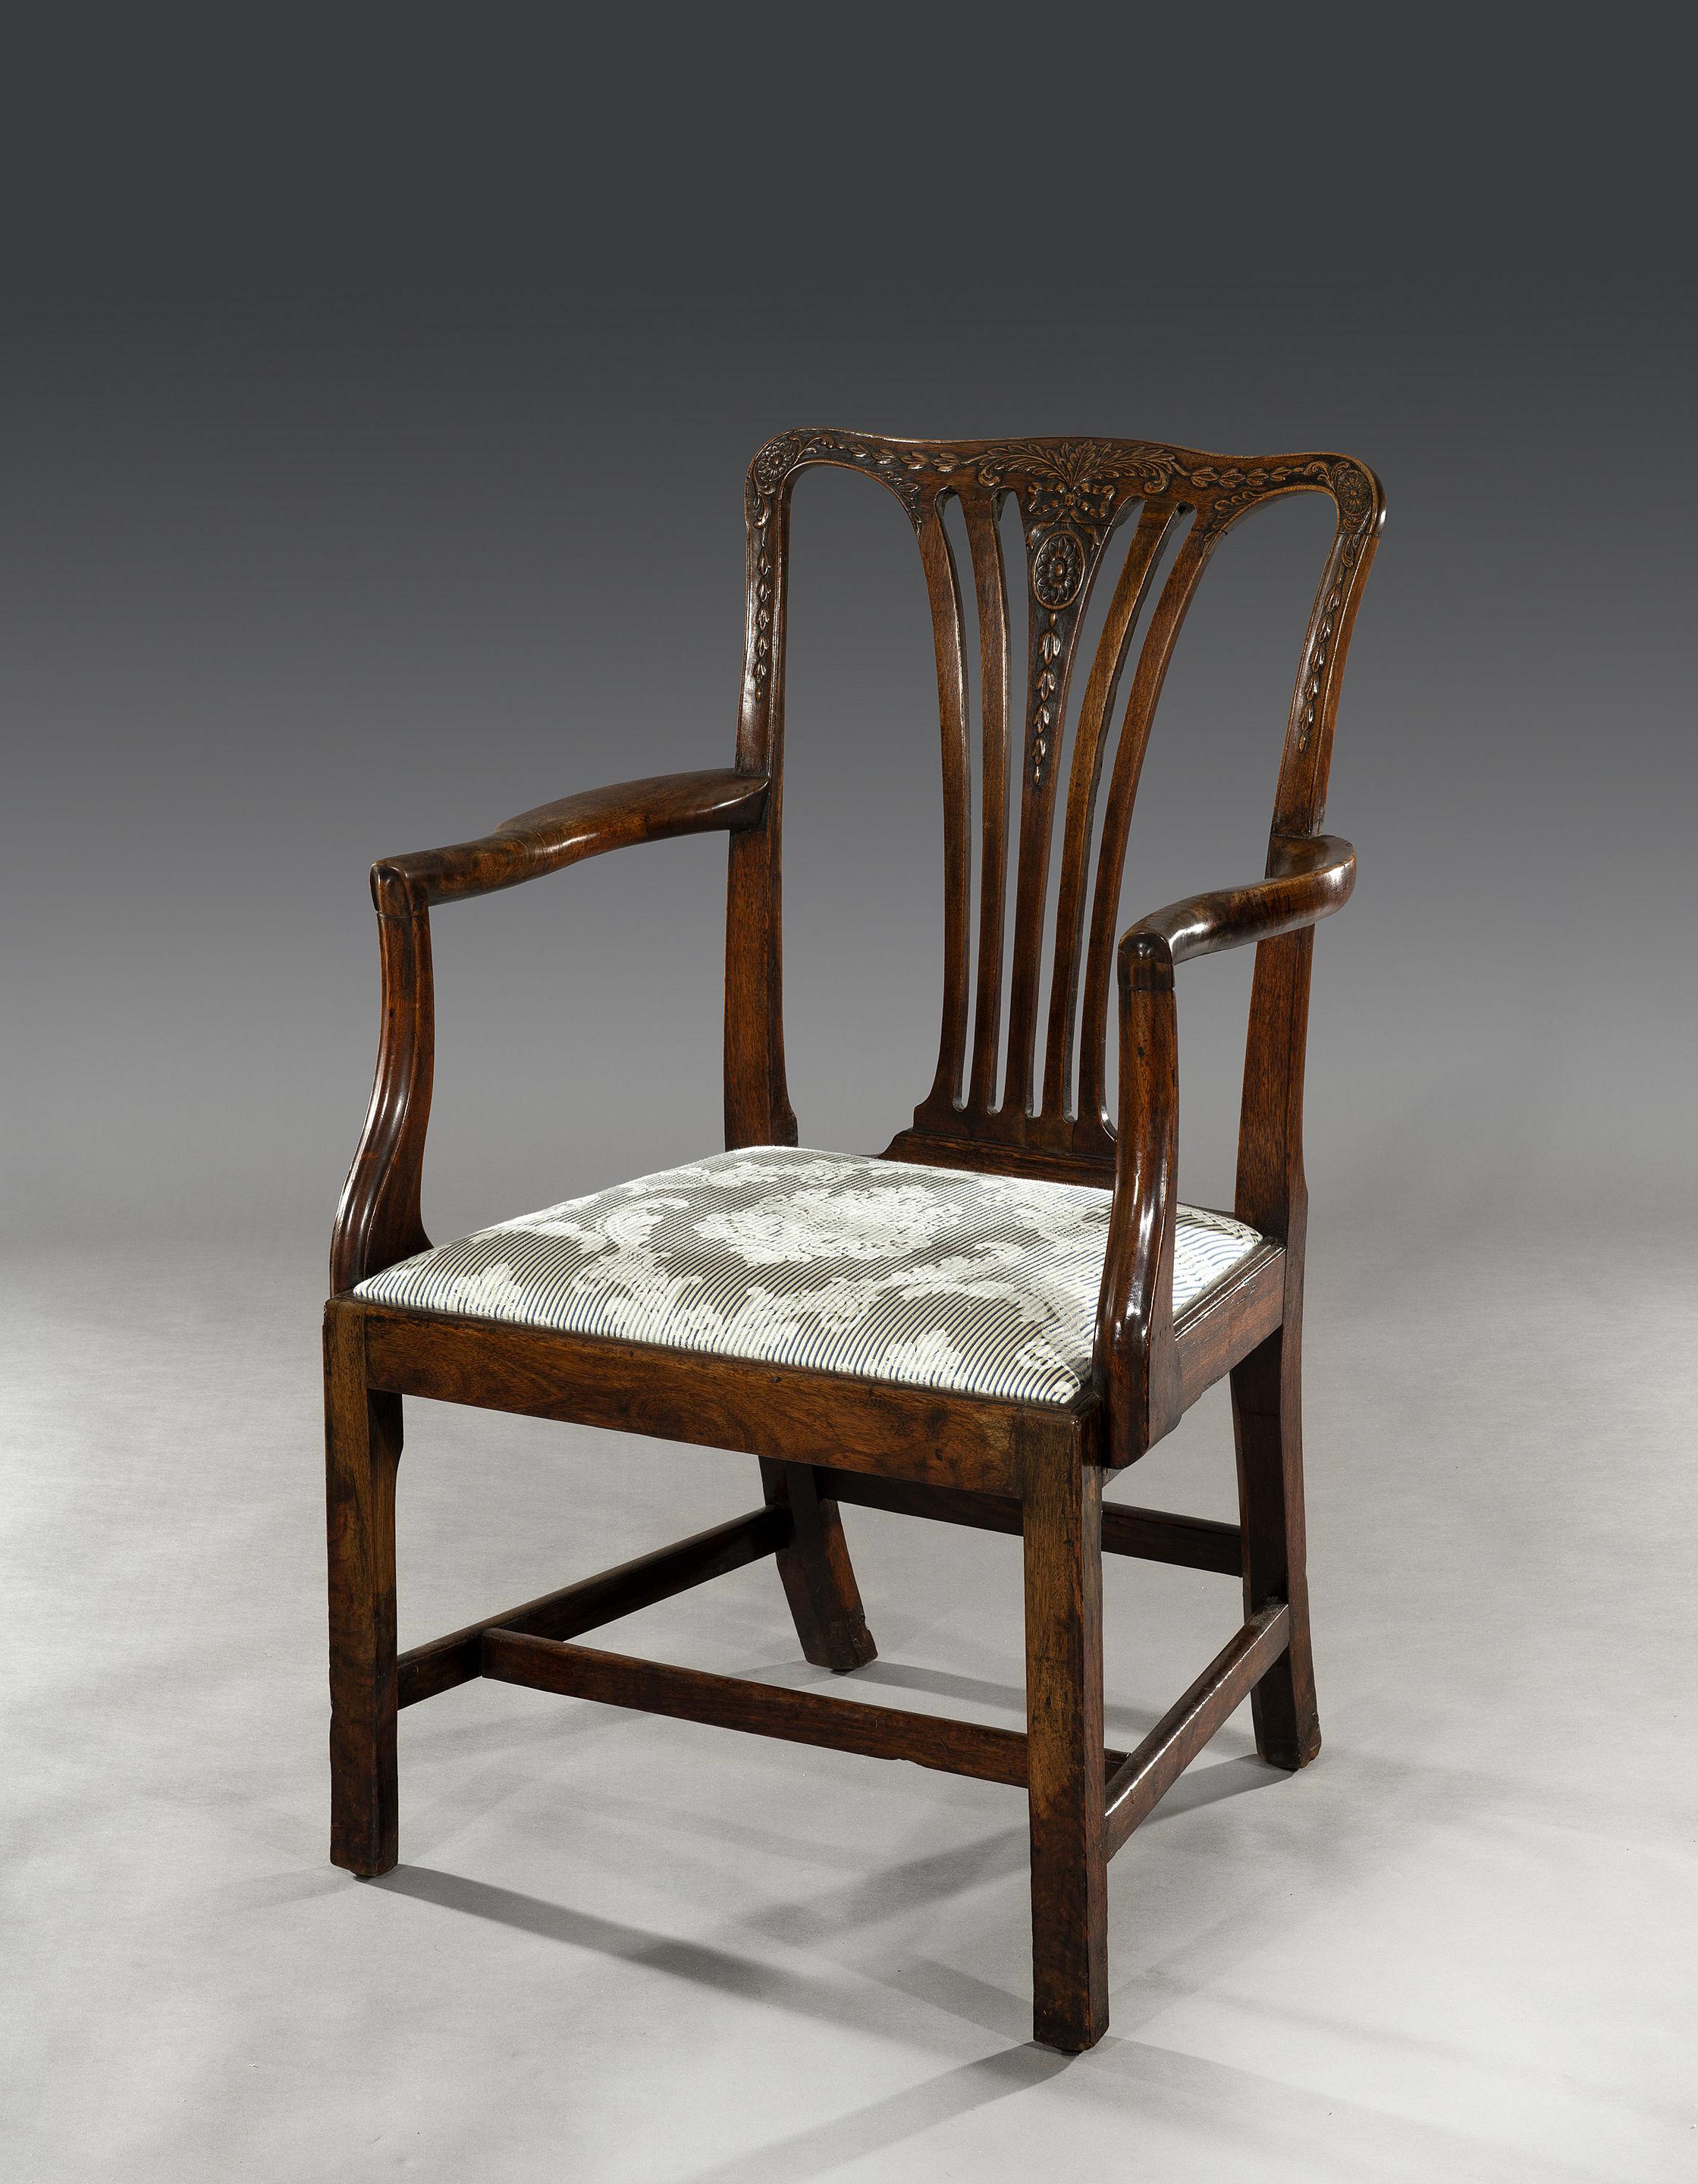 The walnut chair is decorated with ribbons, flowerbells and patere carvings reminiscent of Robert Adam designs. The drop-in seat has been recently re-upholstered in a blue and white damask fabric. Above you have solid burr walnut arms that support